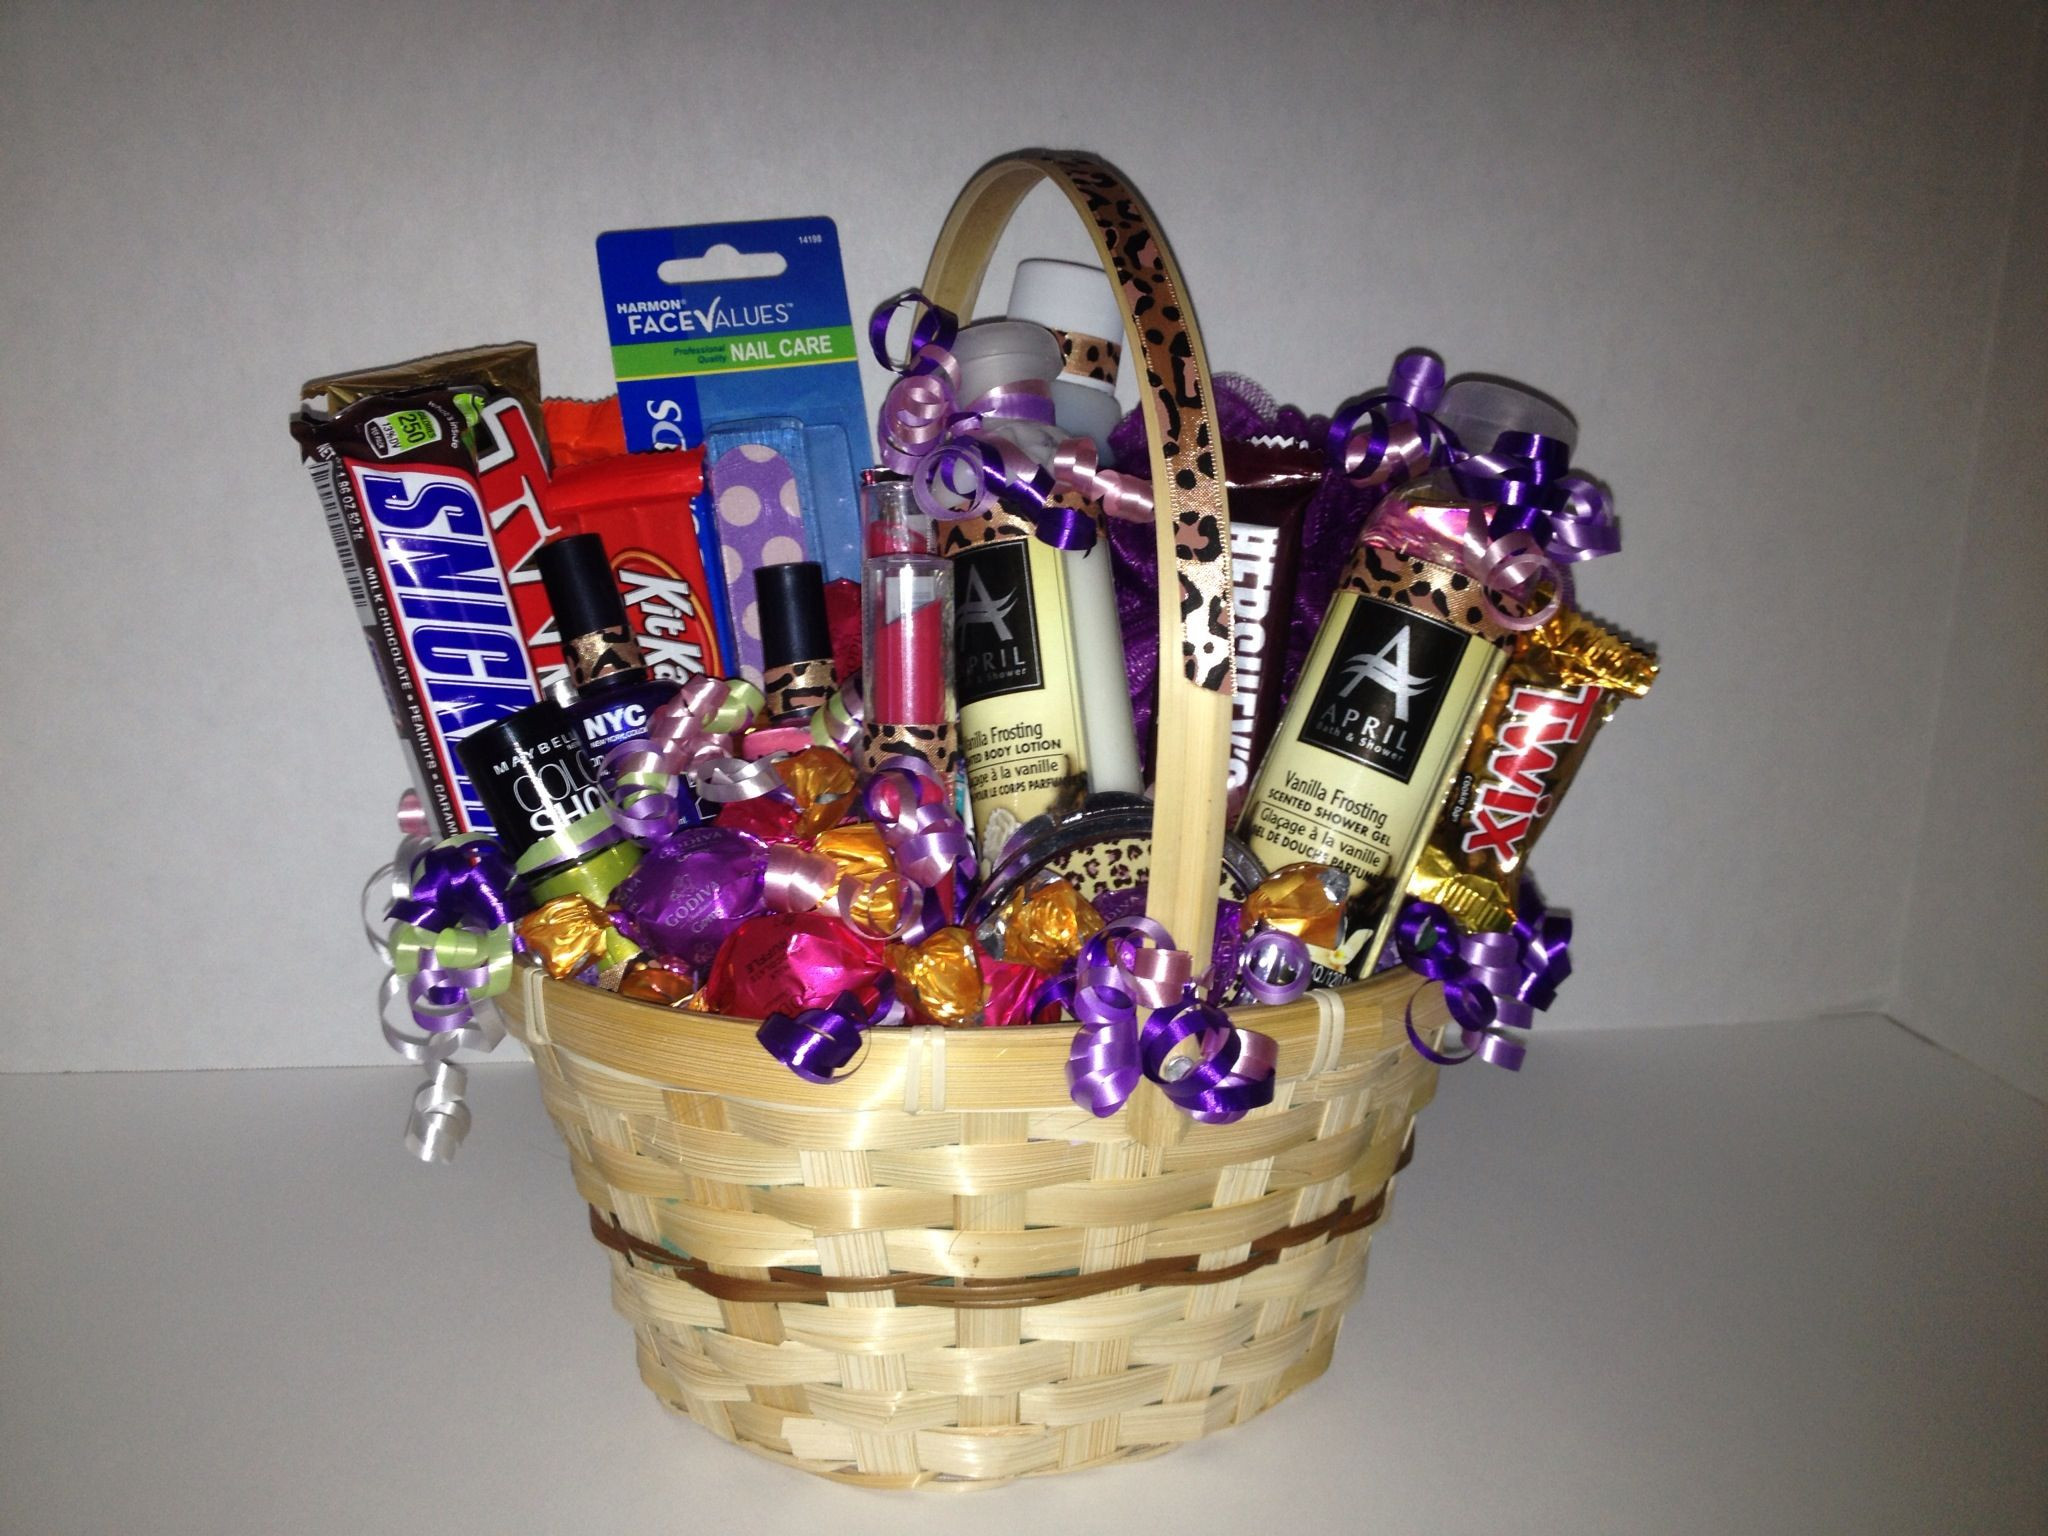 Manicure Gift Basket Ideas
 Nail and spa t basket